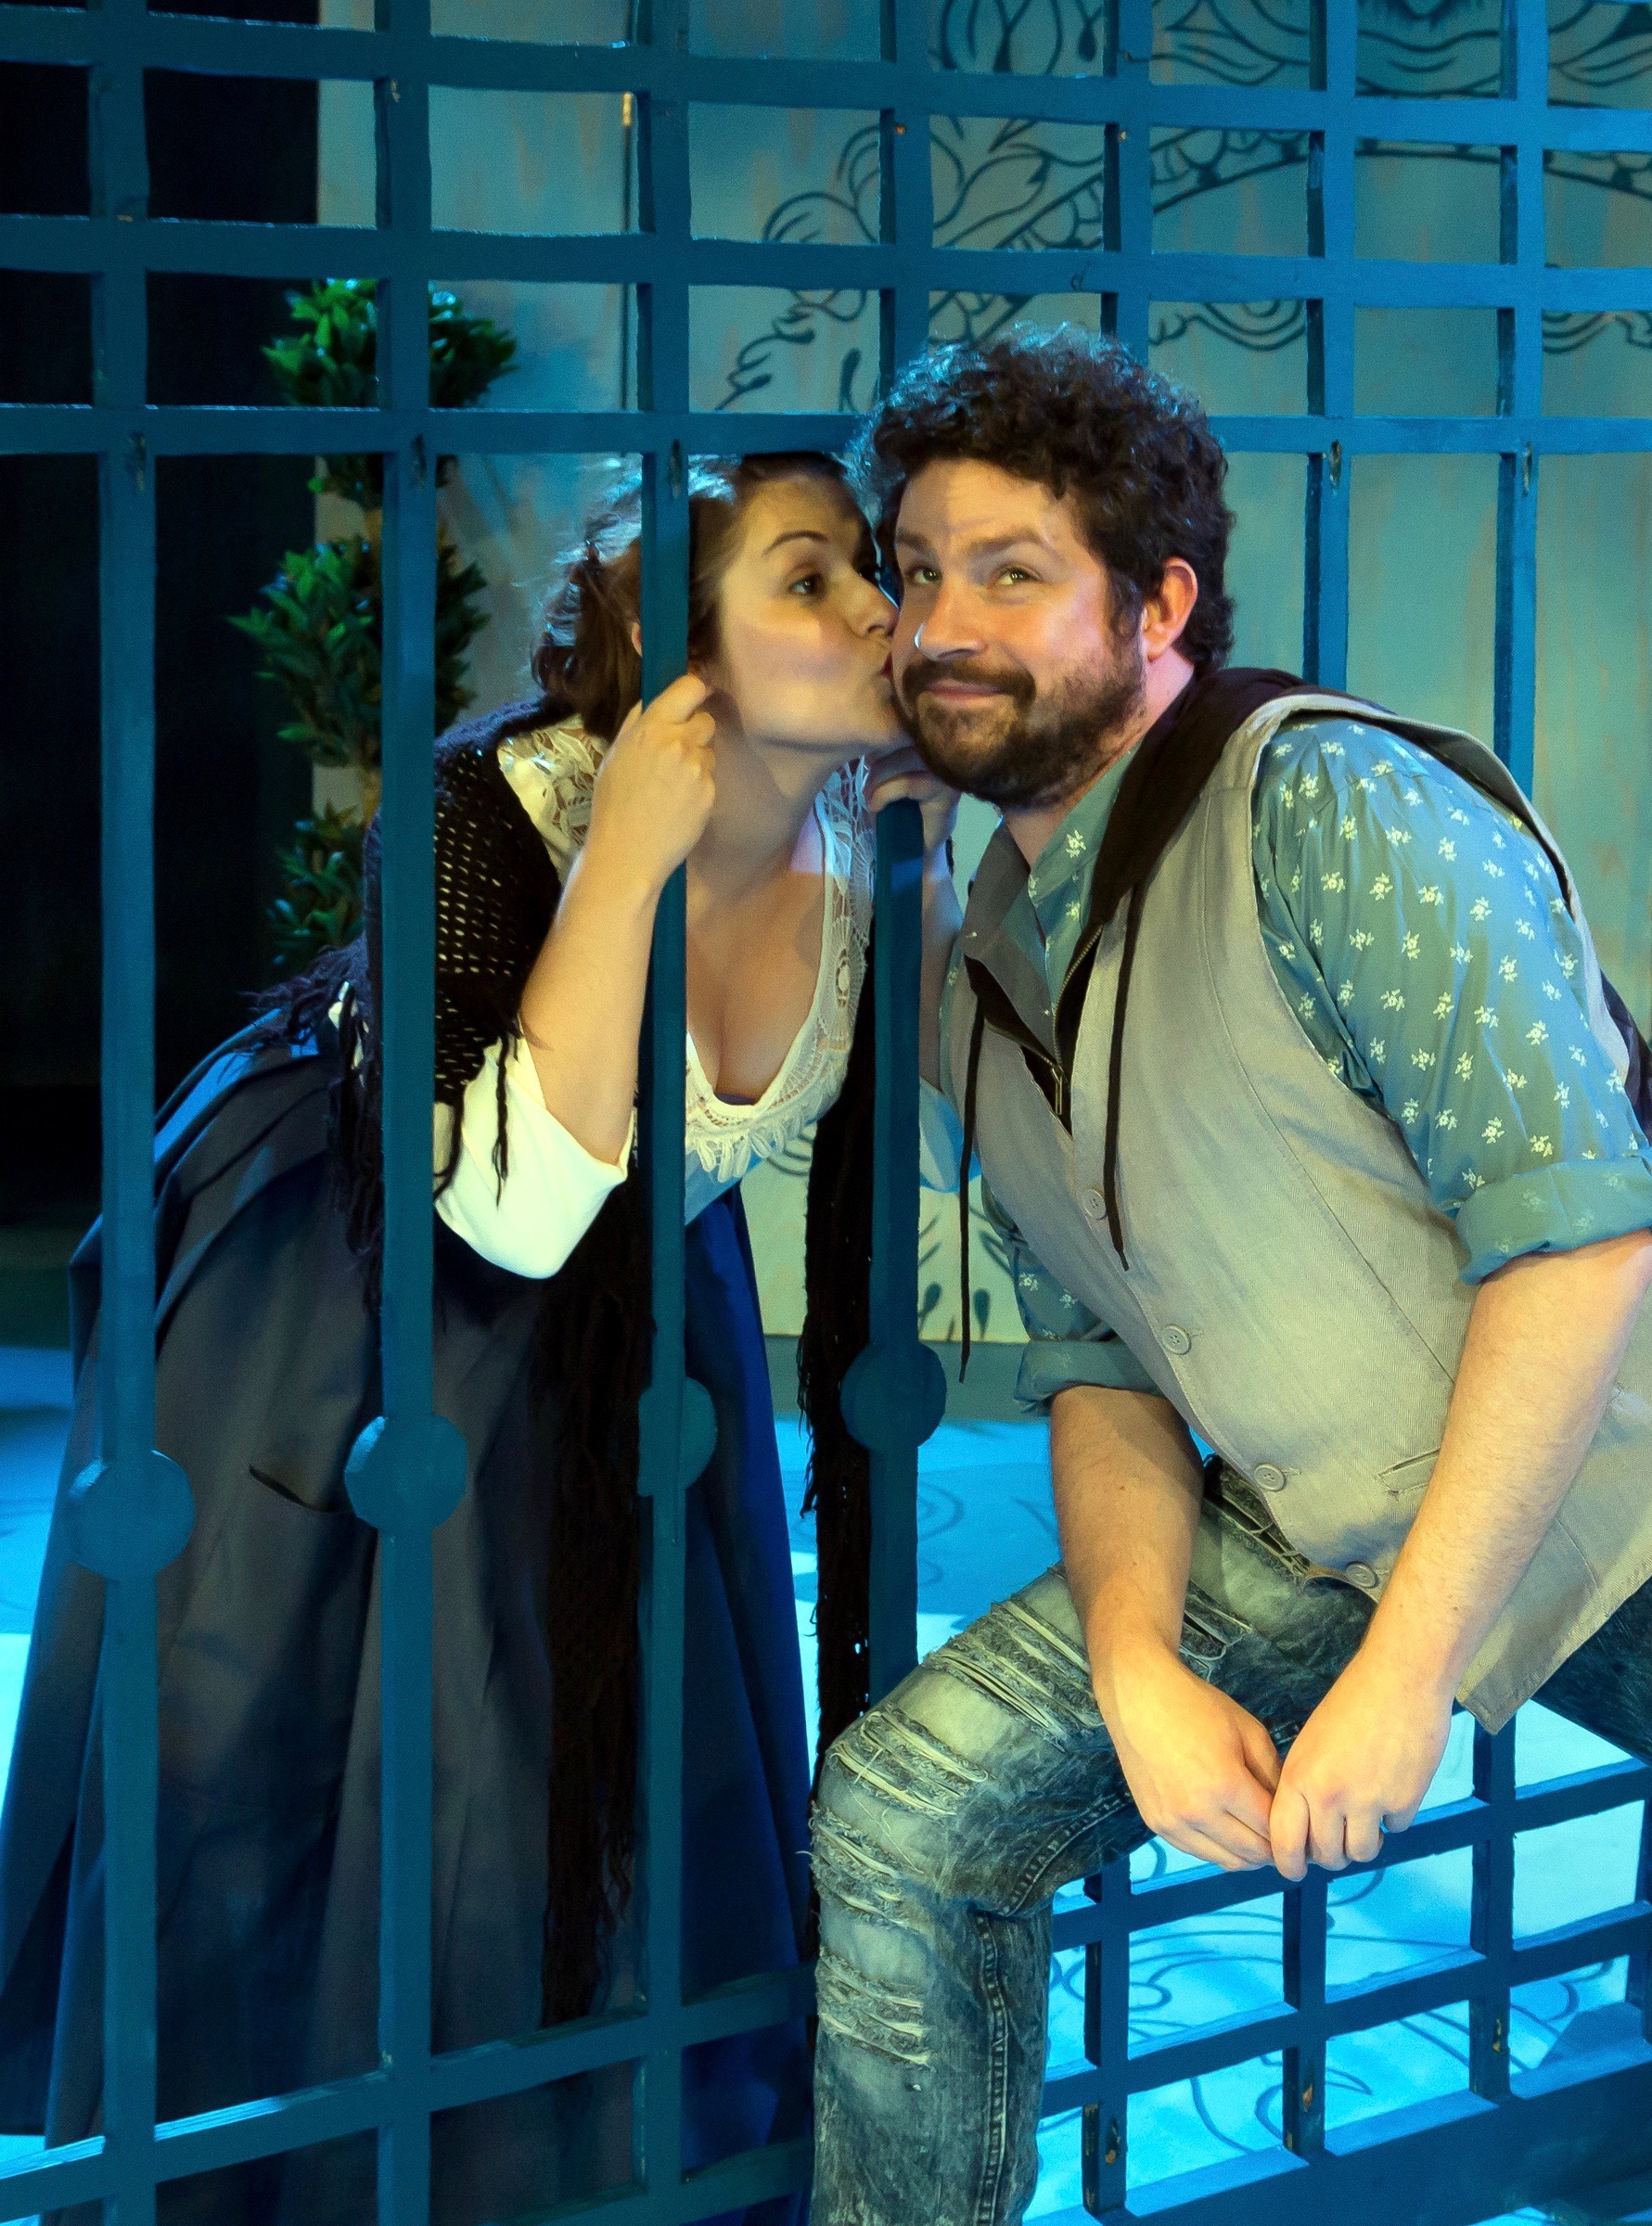 Isabelle (Julianne Avolio) wears her heart on her lips and Cliton (Patrick Halley) is smitten.